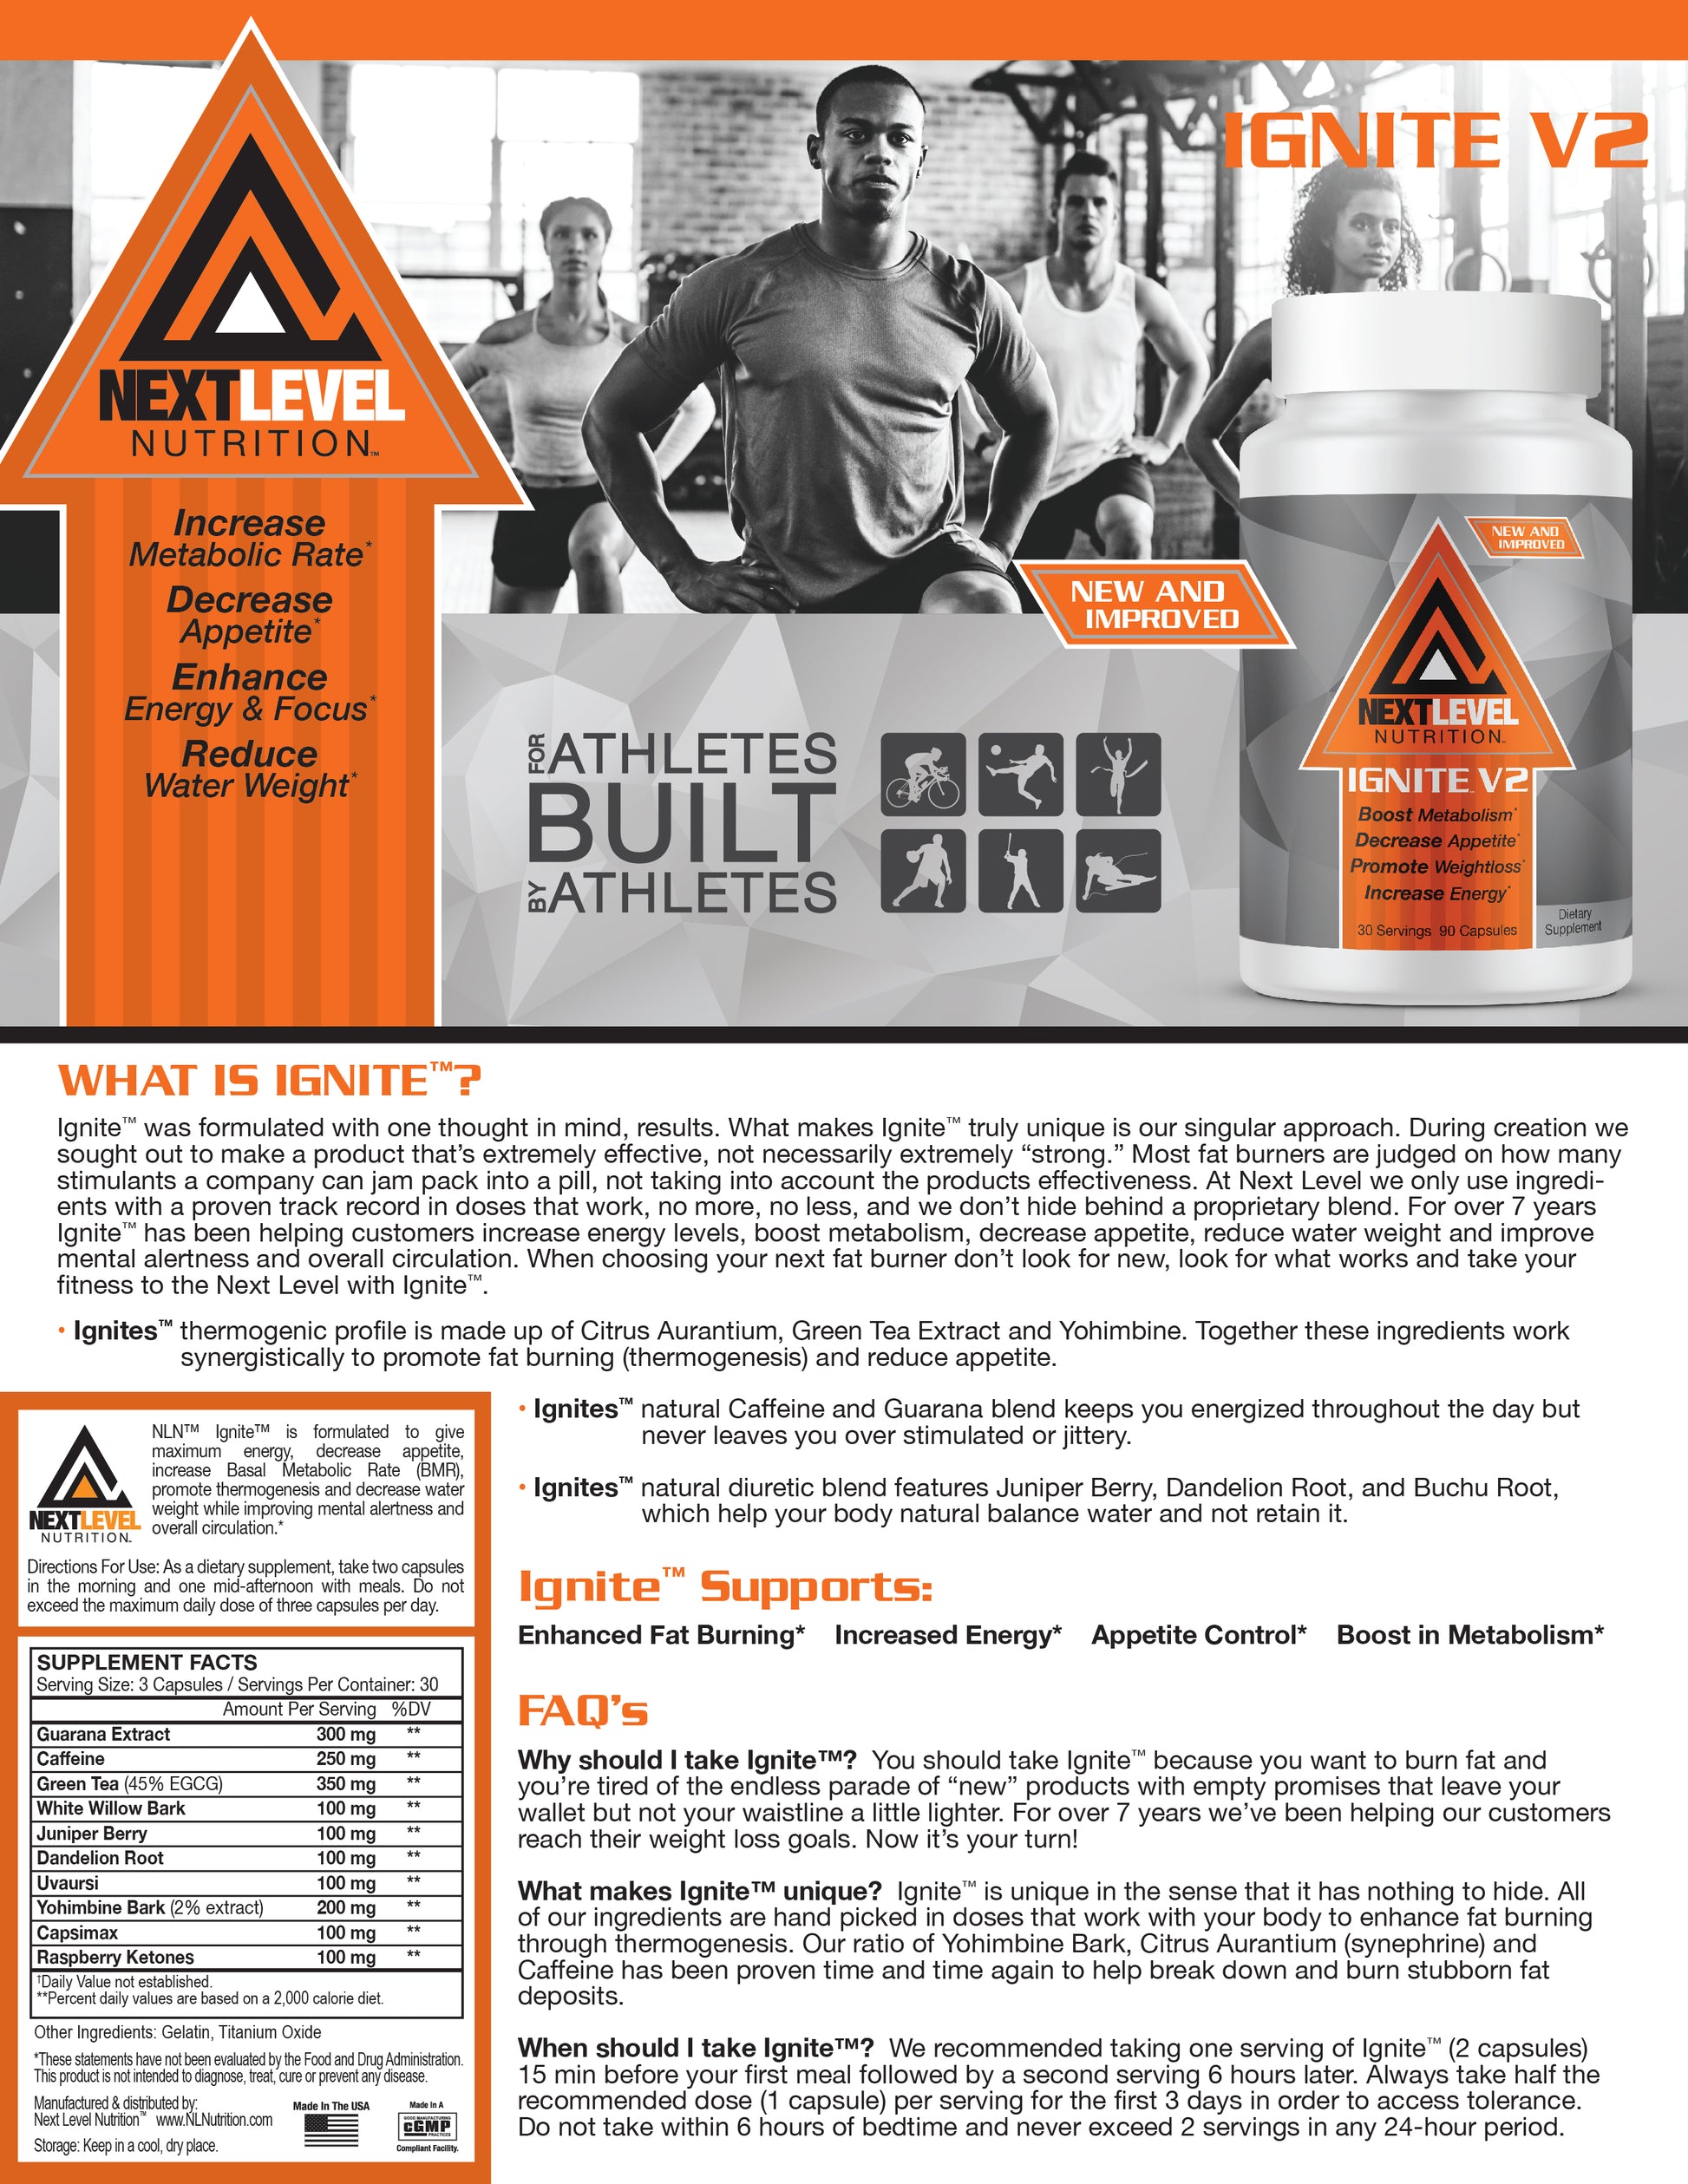 Fat Burner Multi Stage Thermogenic, Boost Metabolism